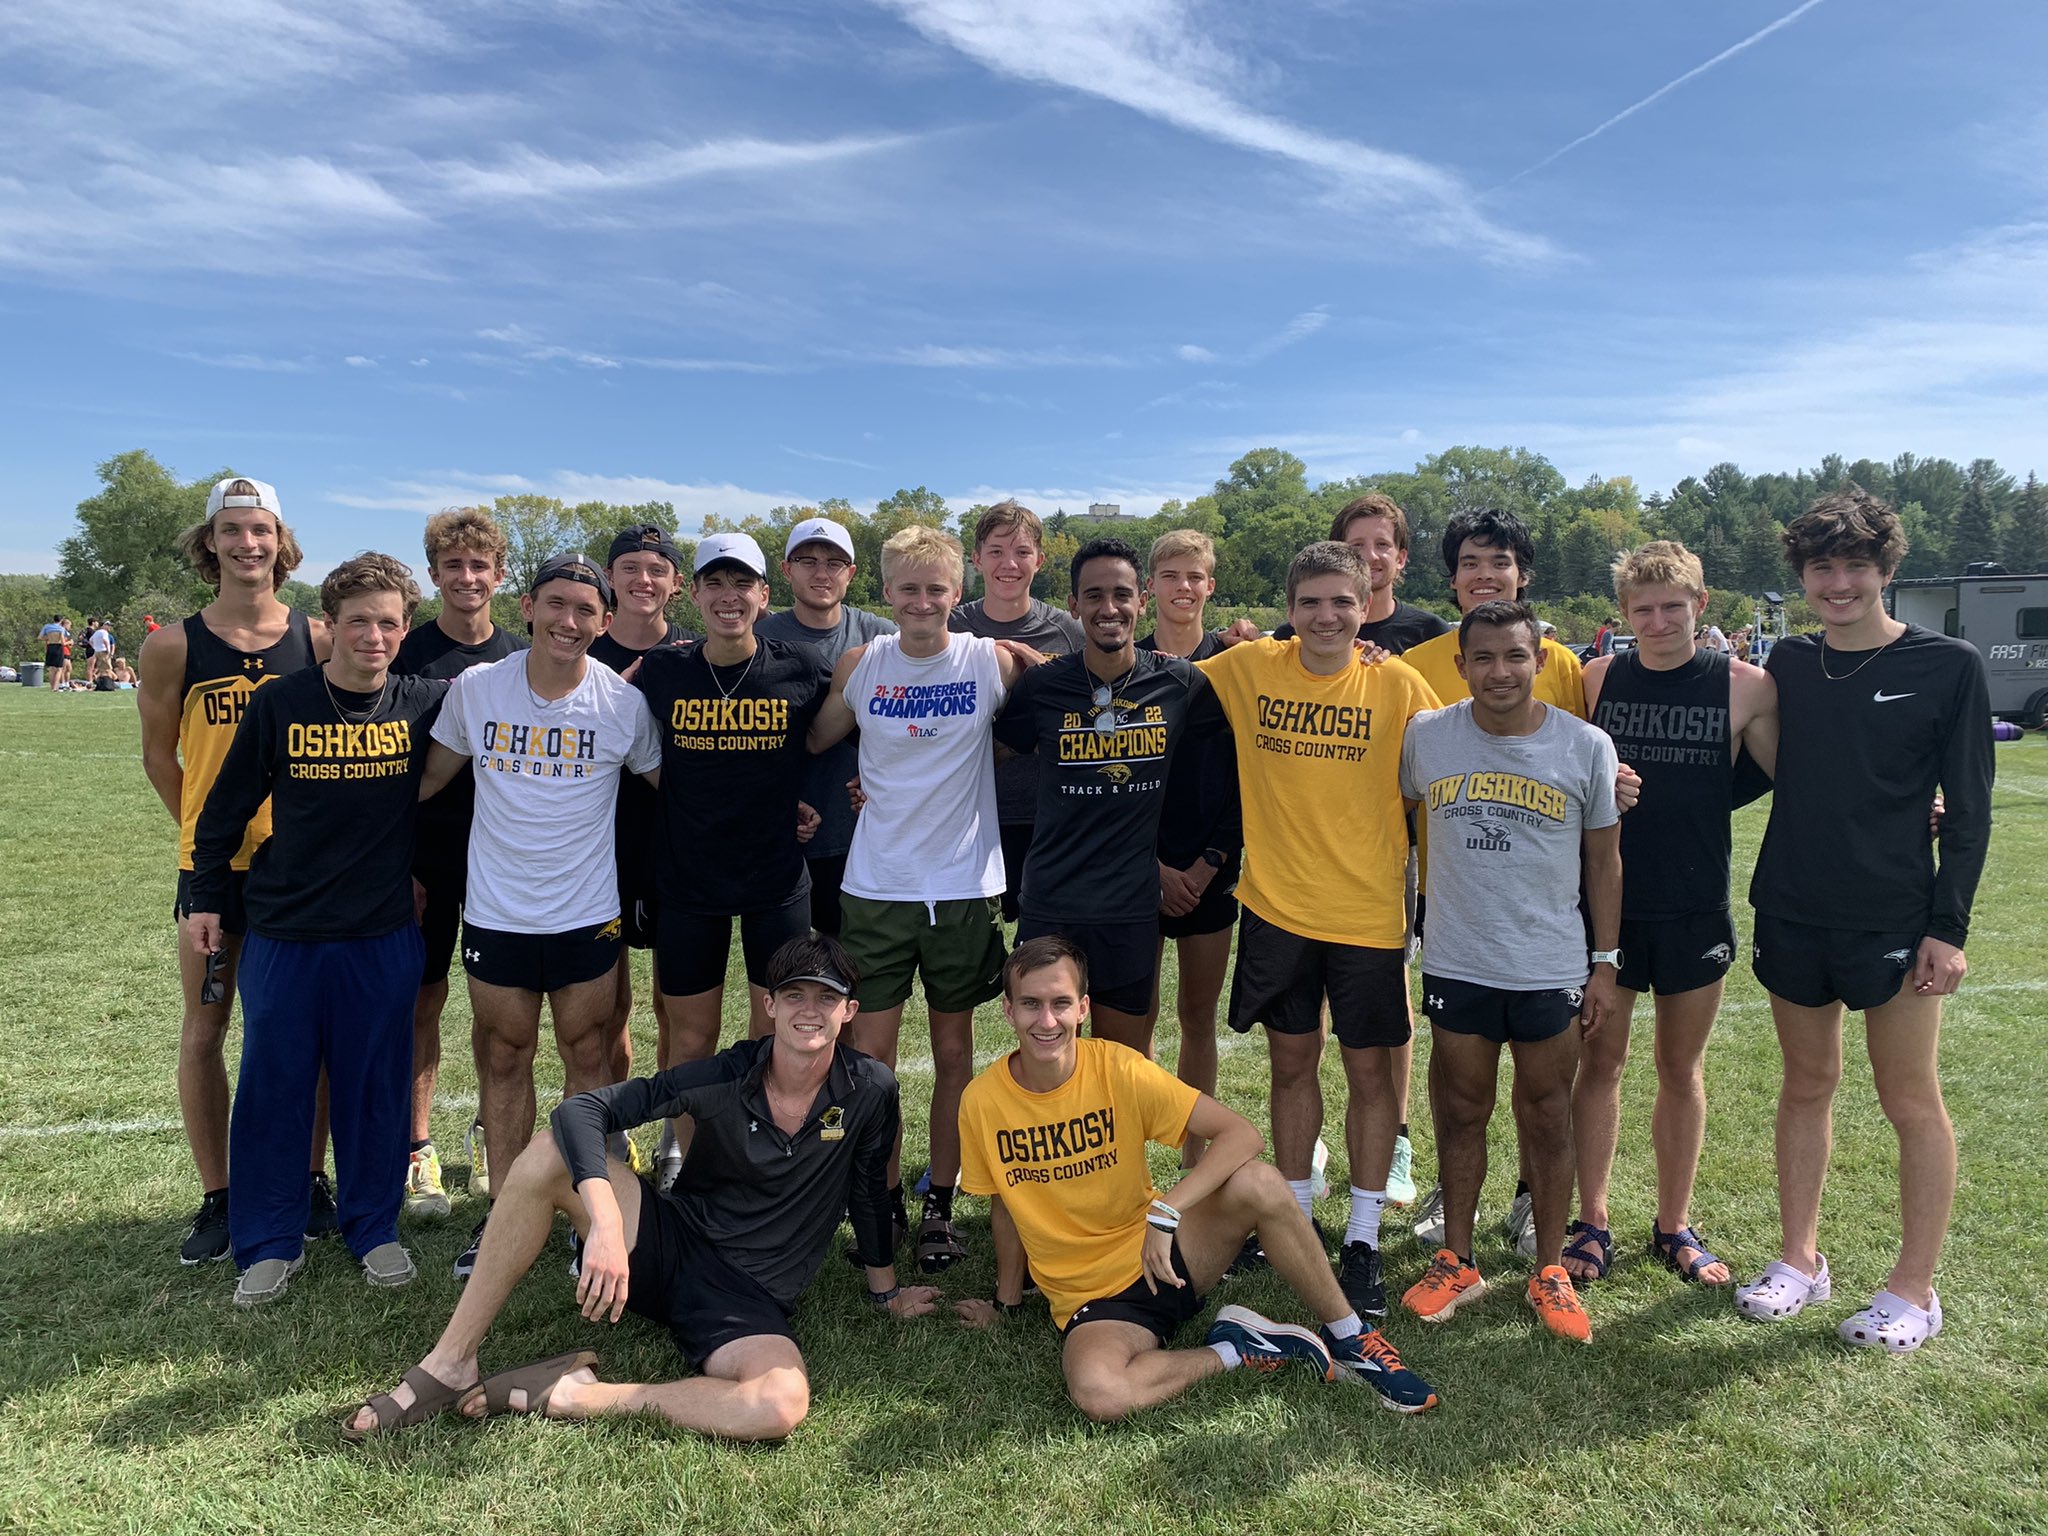 Men's Cross Country celebrates after the race 

PC: UWO Track and Field/Cross Country